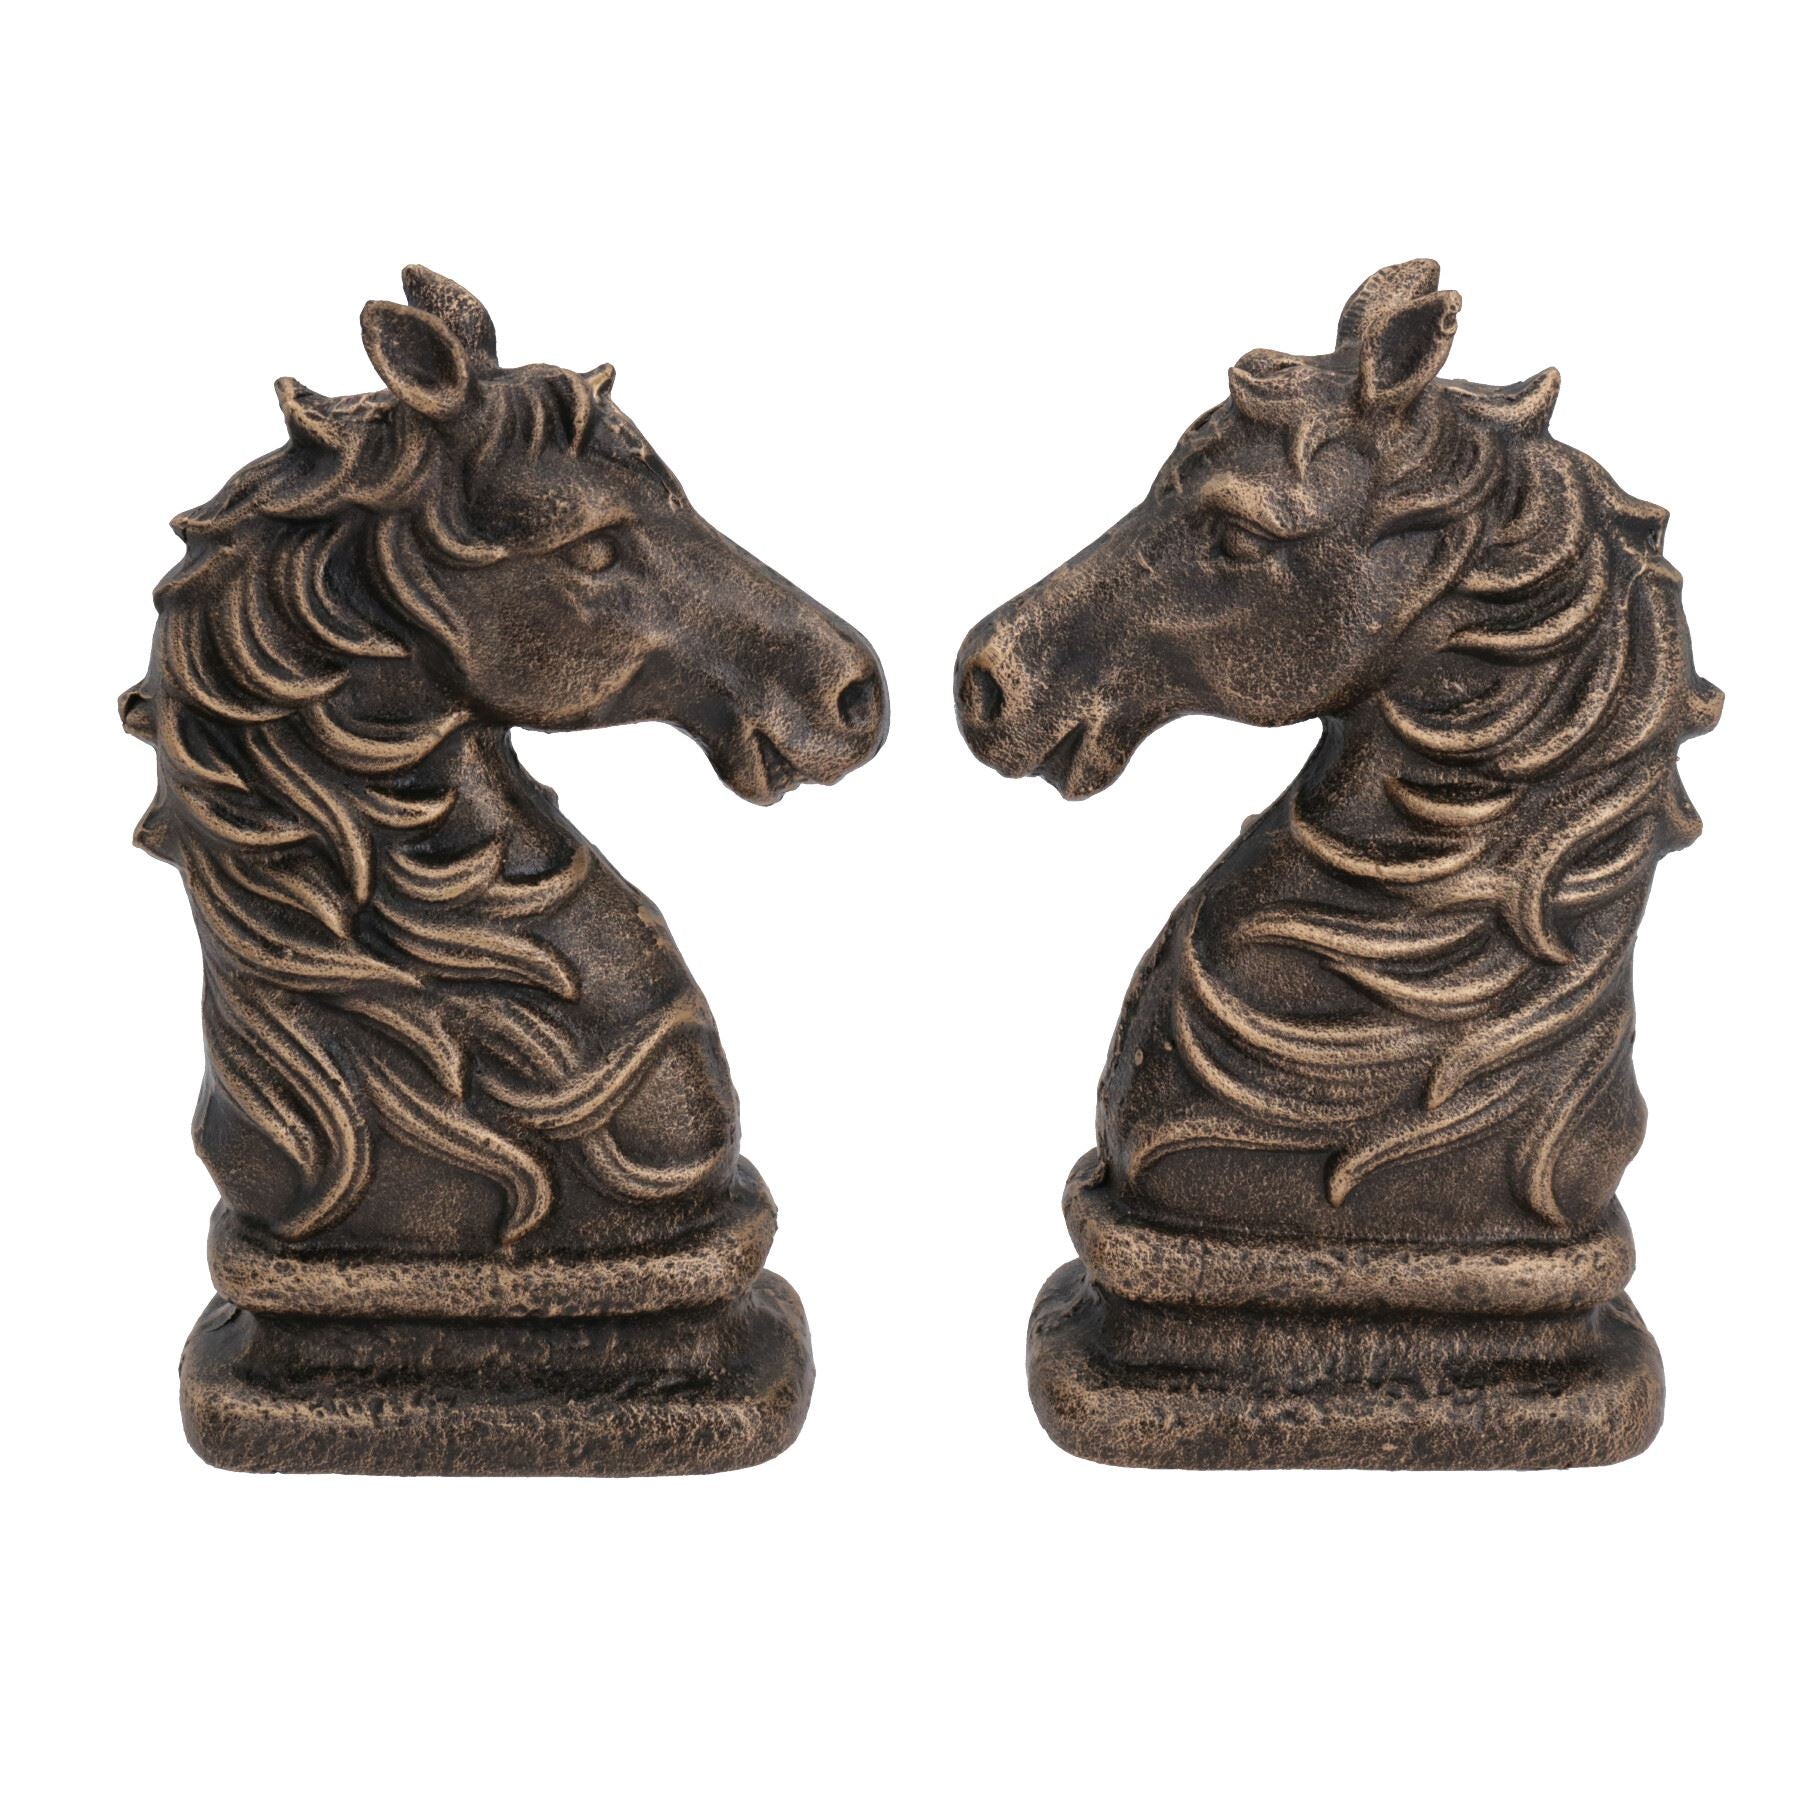 Horse Head Bust Bookends Ornament Figurine Cast Iron Book Ends Stand Holder